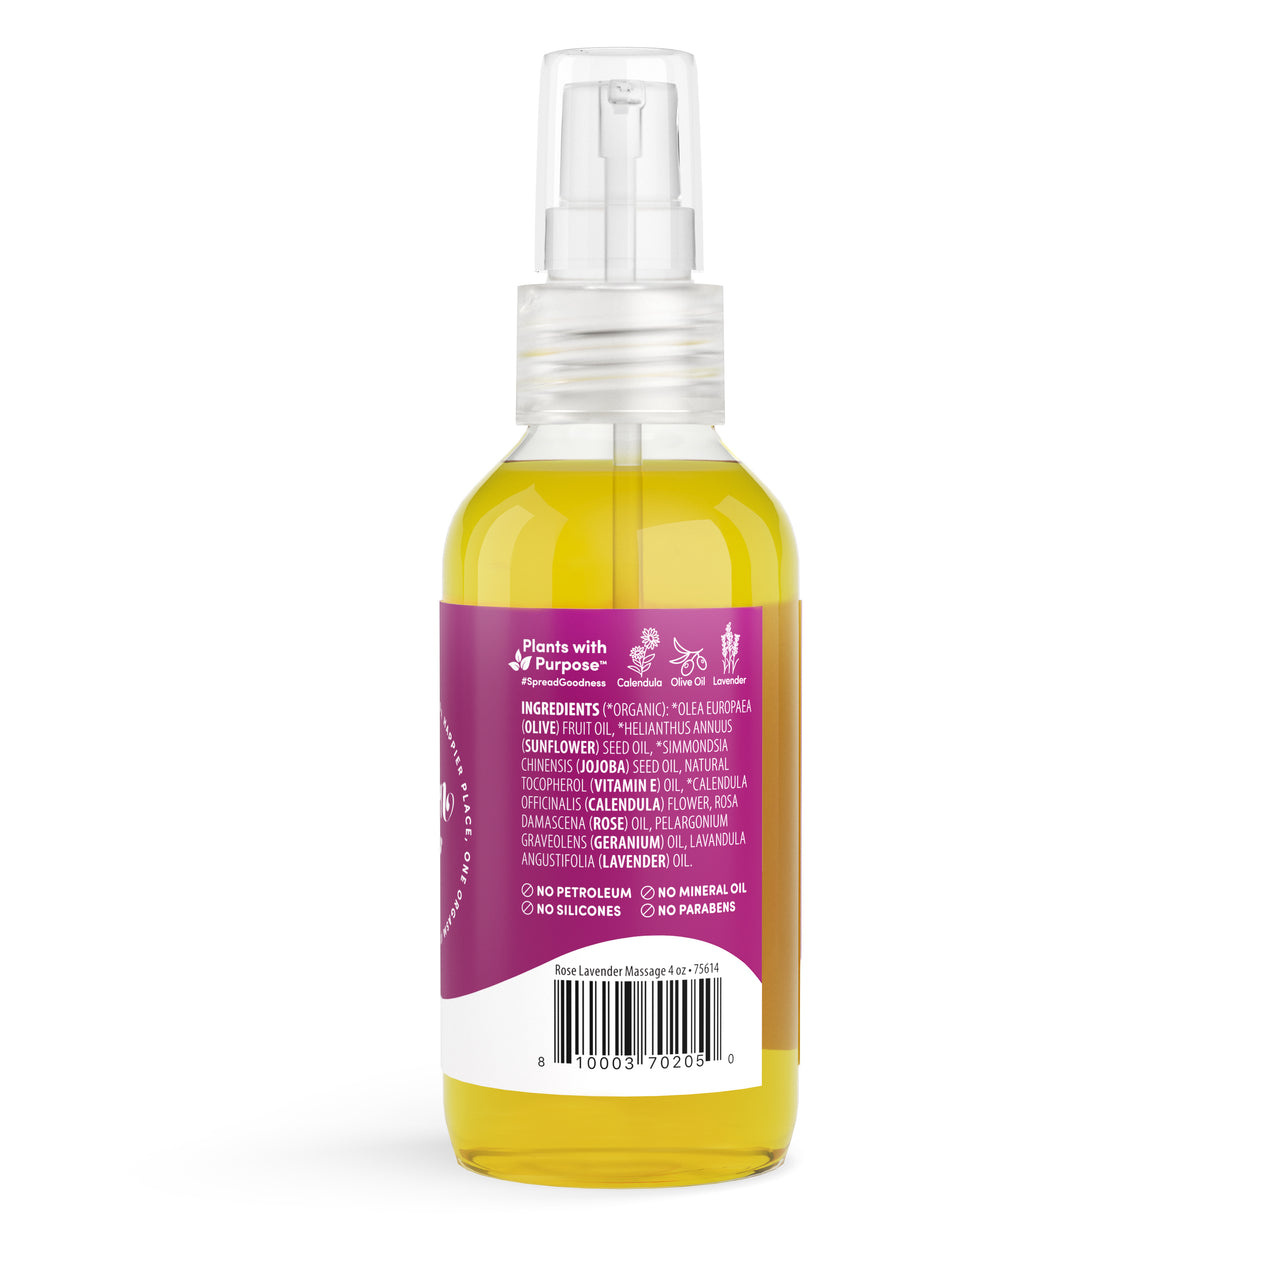 Massage Oil - Rose + Lavender by Southern Butter